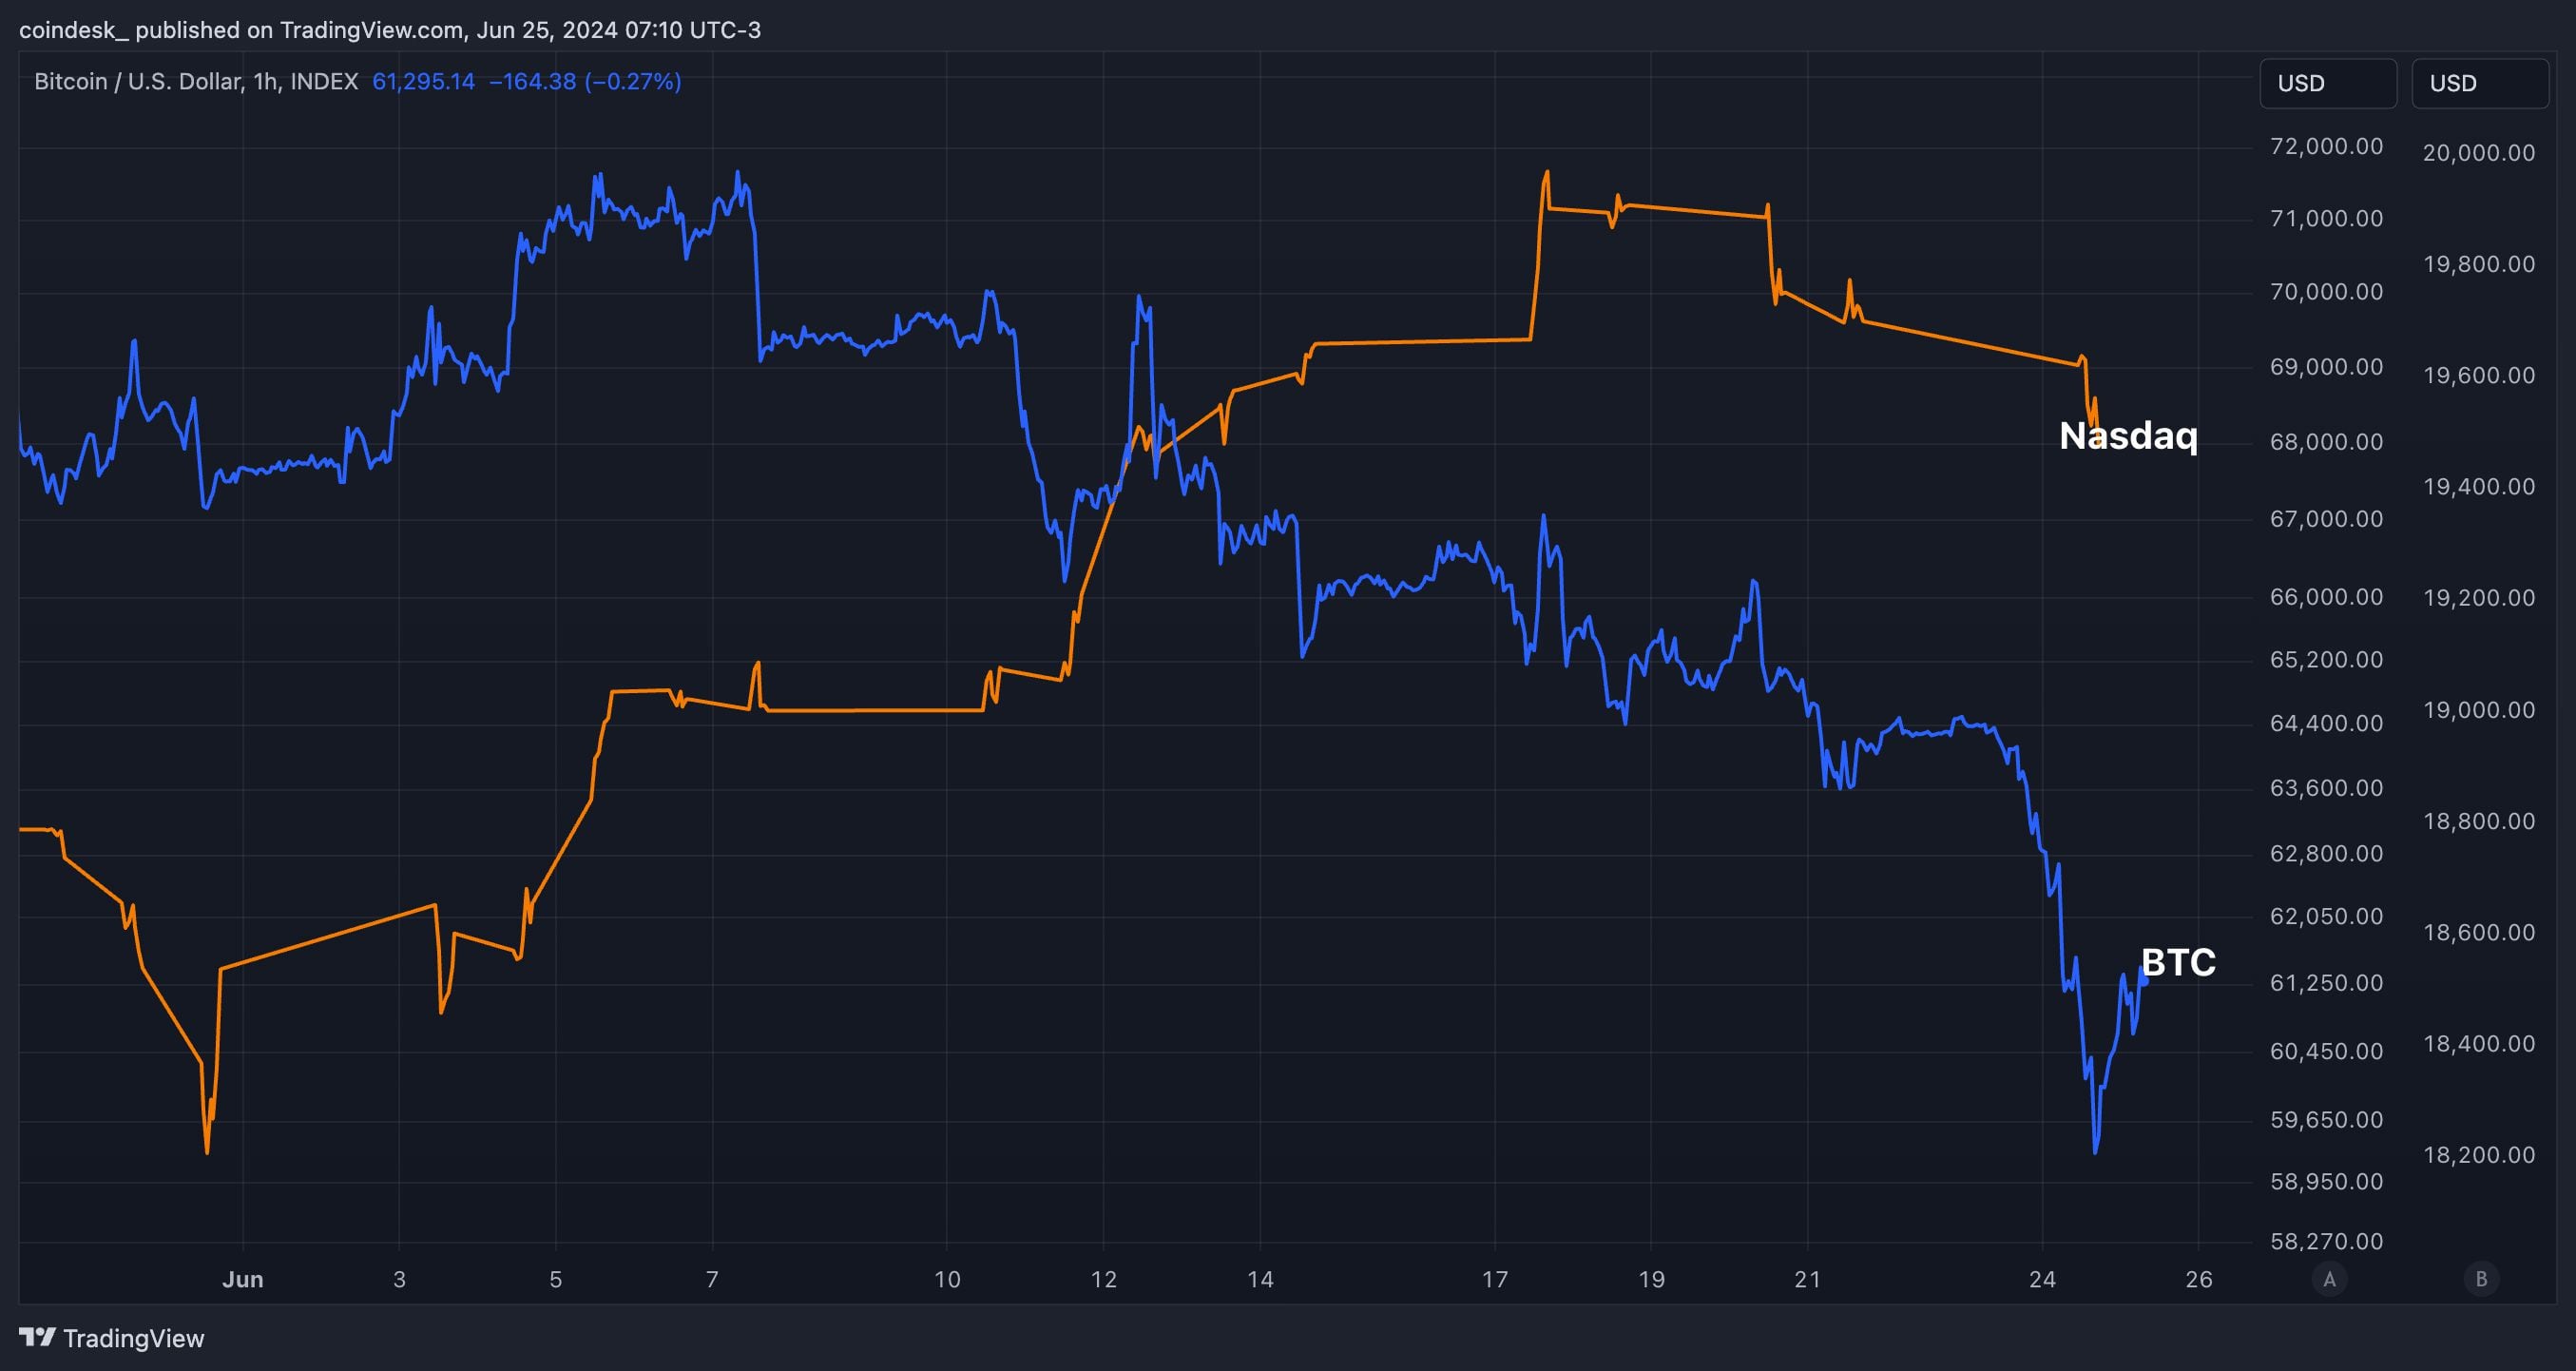 Monthly performance of BTC and Nasdaq. (TradingView/CoinDesk)